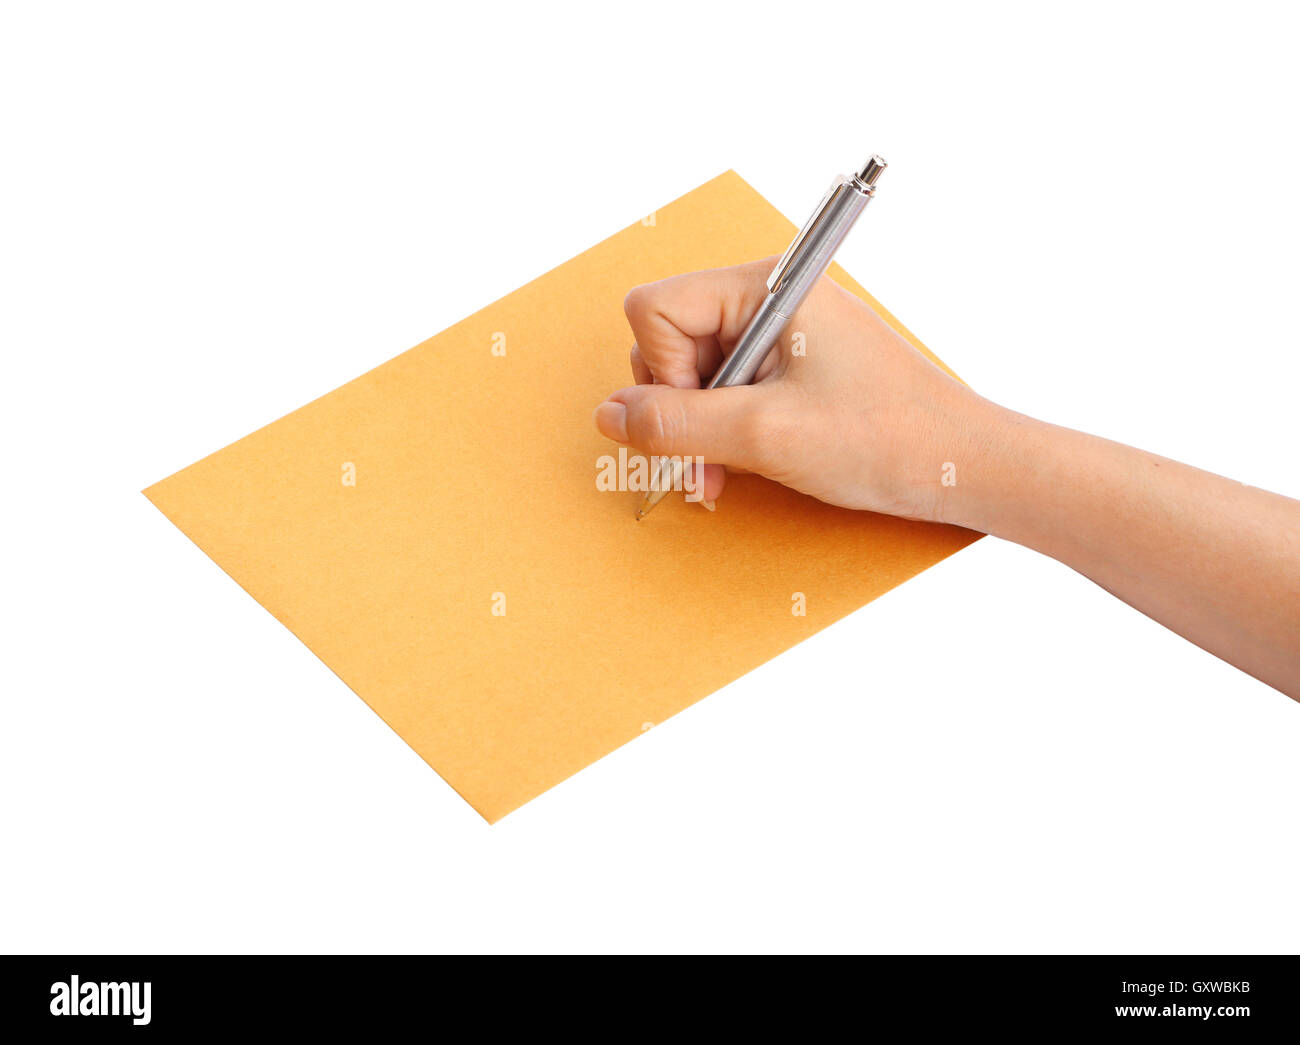 hand with pen writing on the envelope Stock Photo